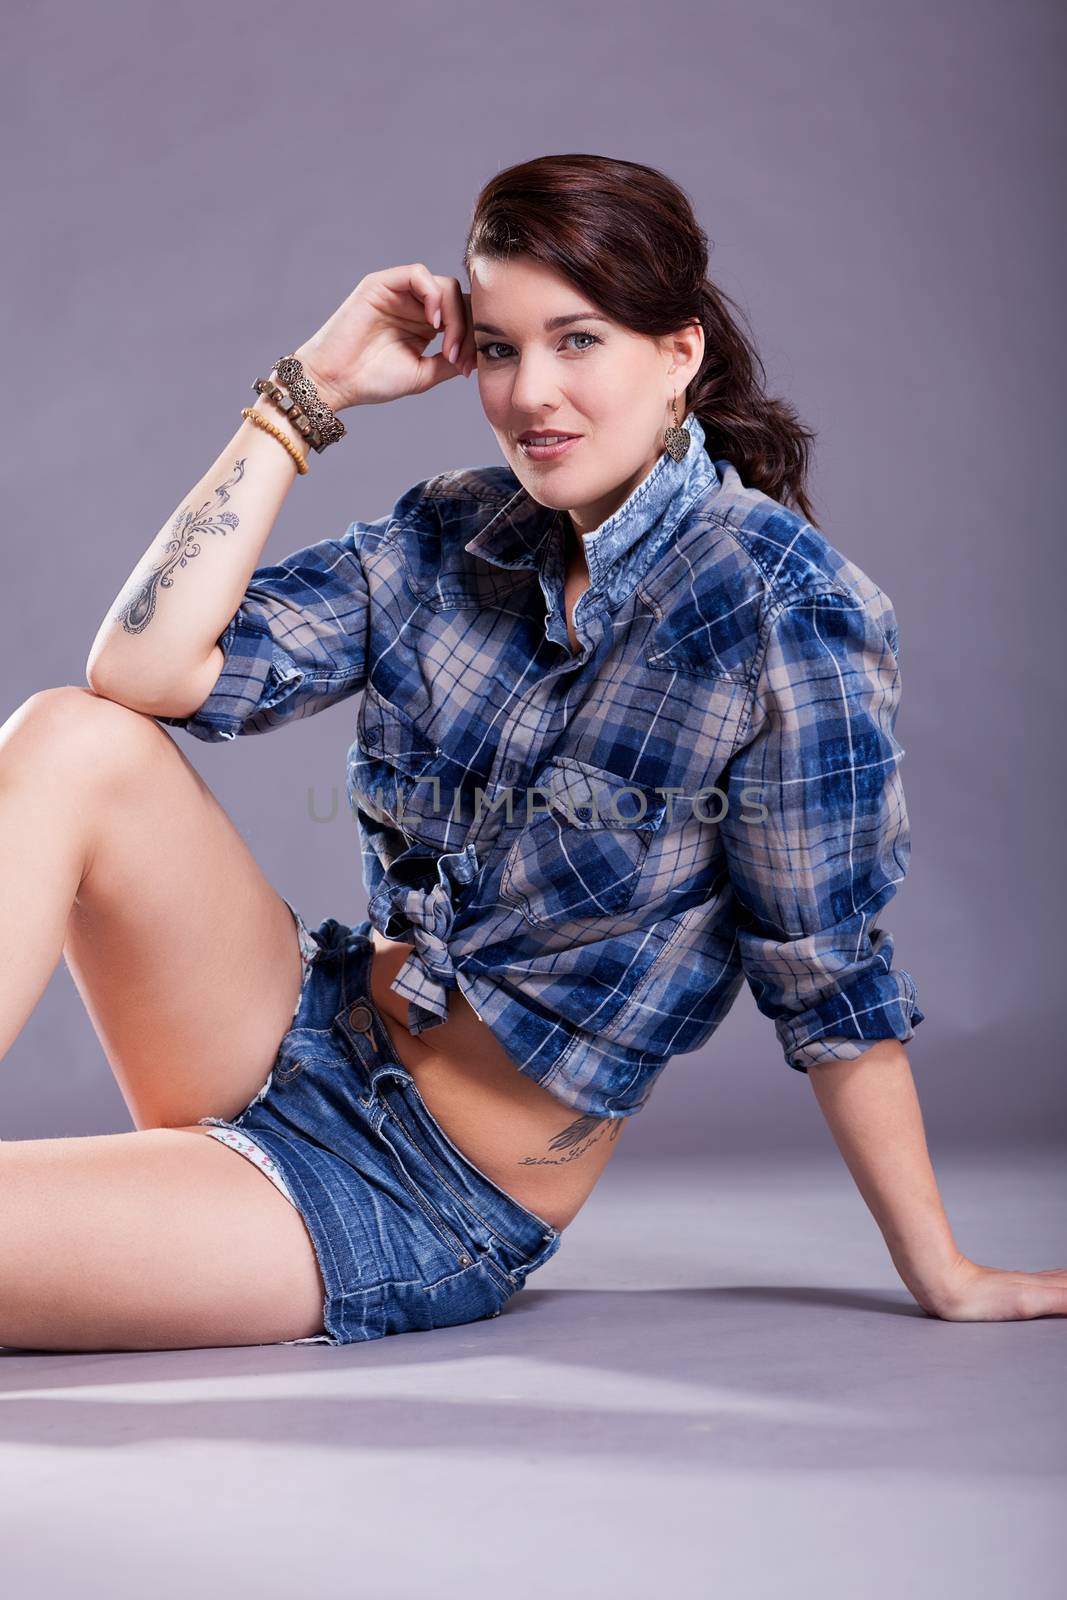 Beautiful single woman in western style boots, jeans shorts and blue flannel shirt with tattooed arm sitting over gray background